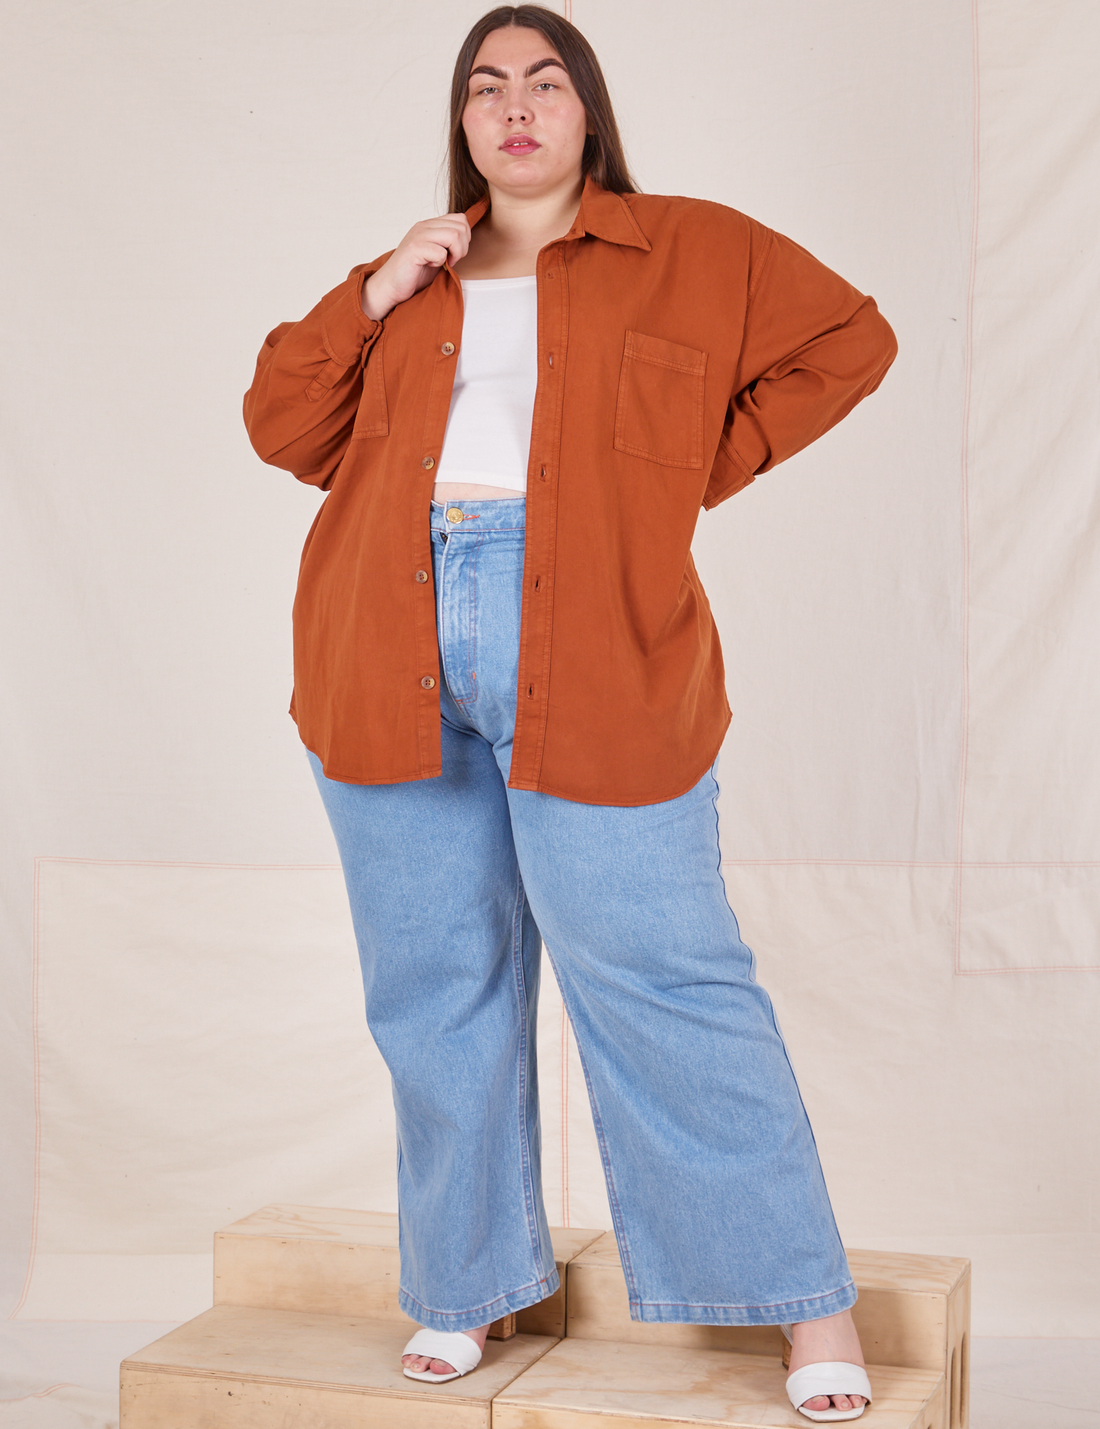 Marielena is wearing Oversize Overshirt in Burnt Terracotta and light wash Sailor Jeans